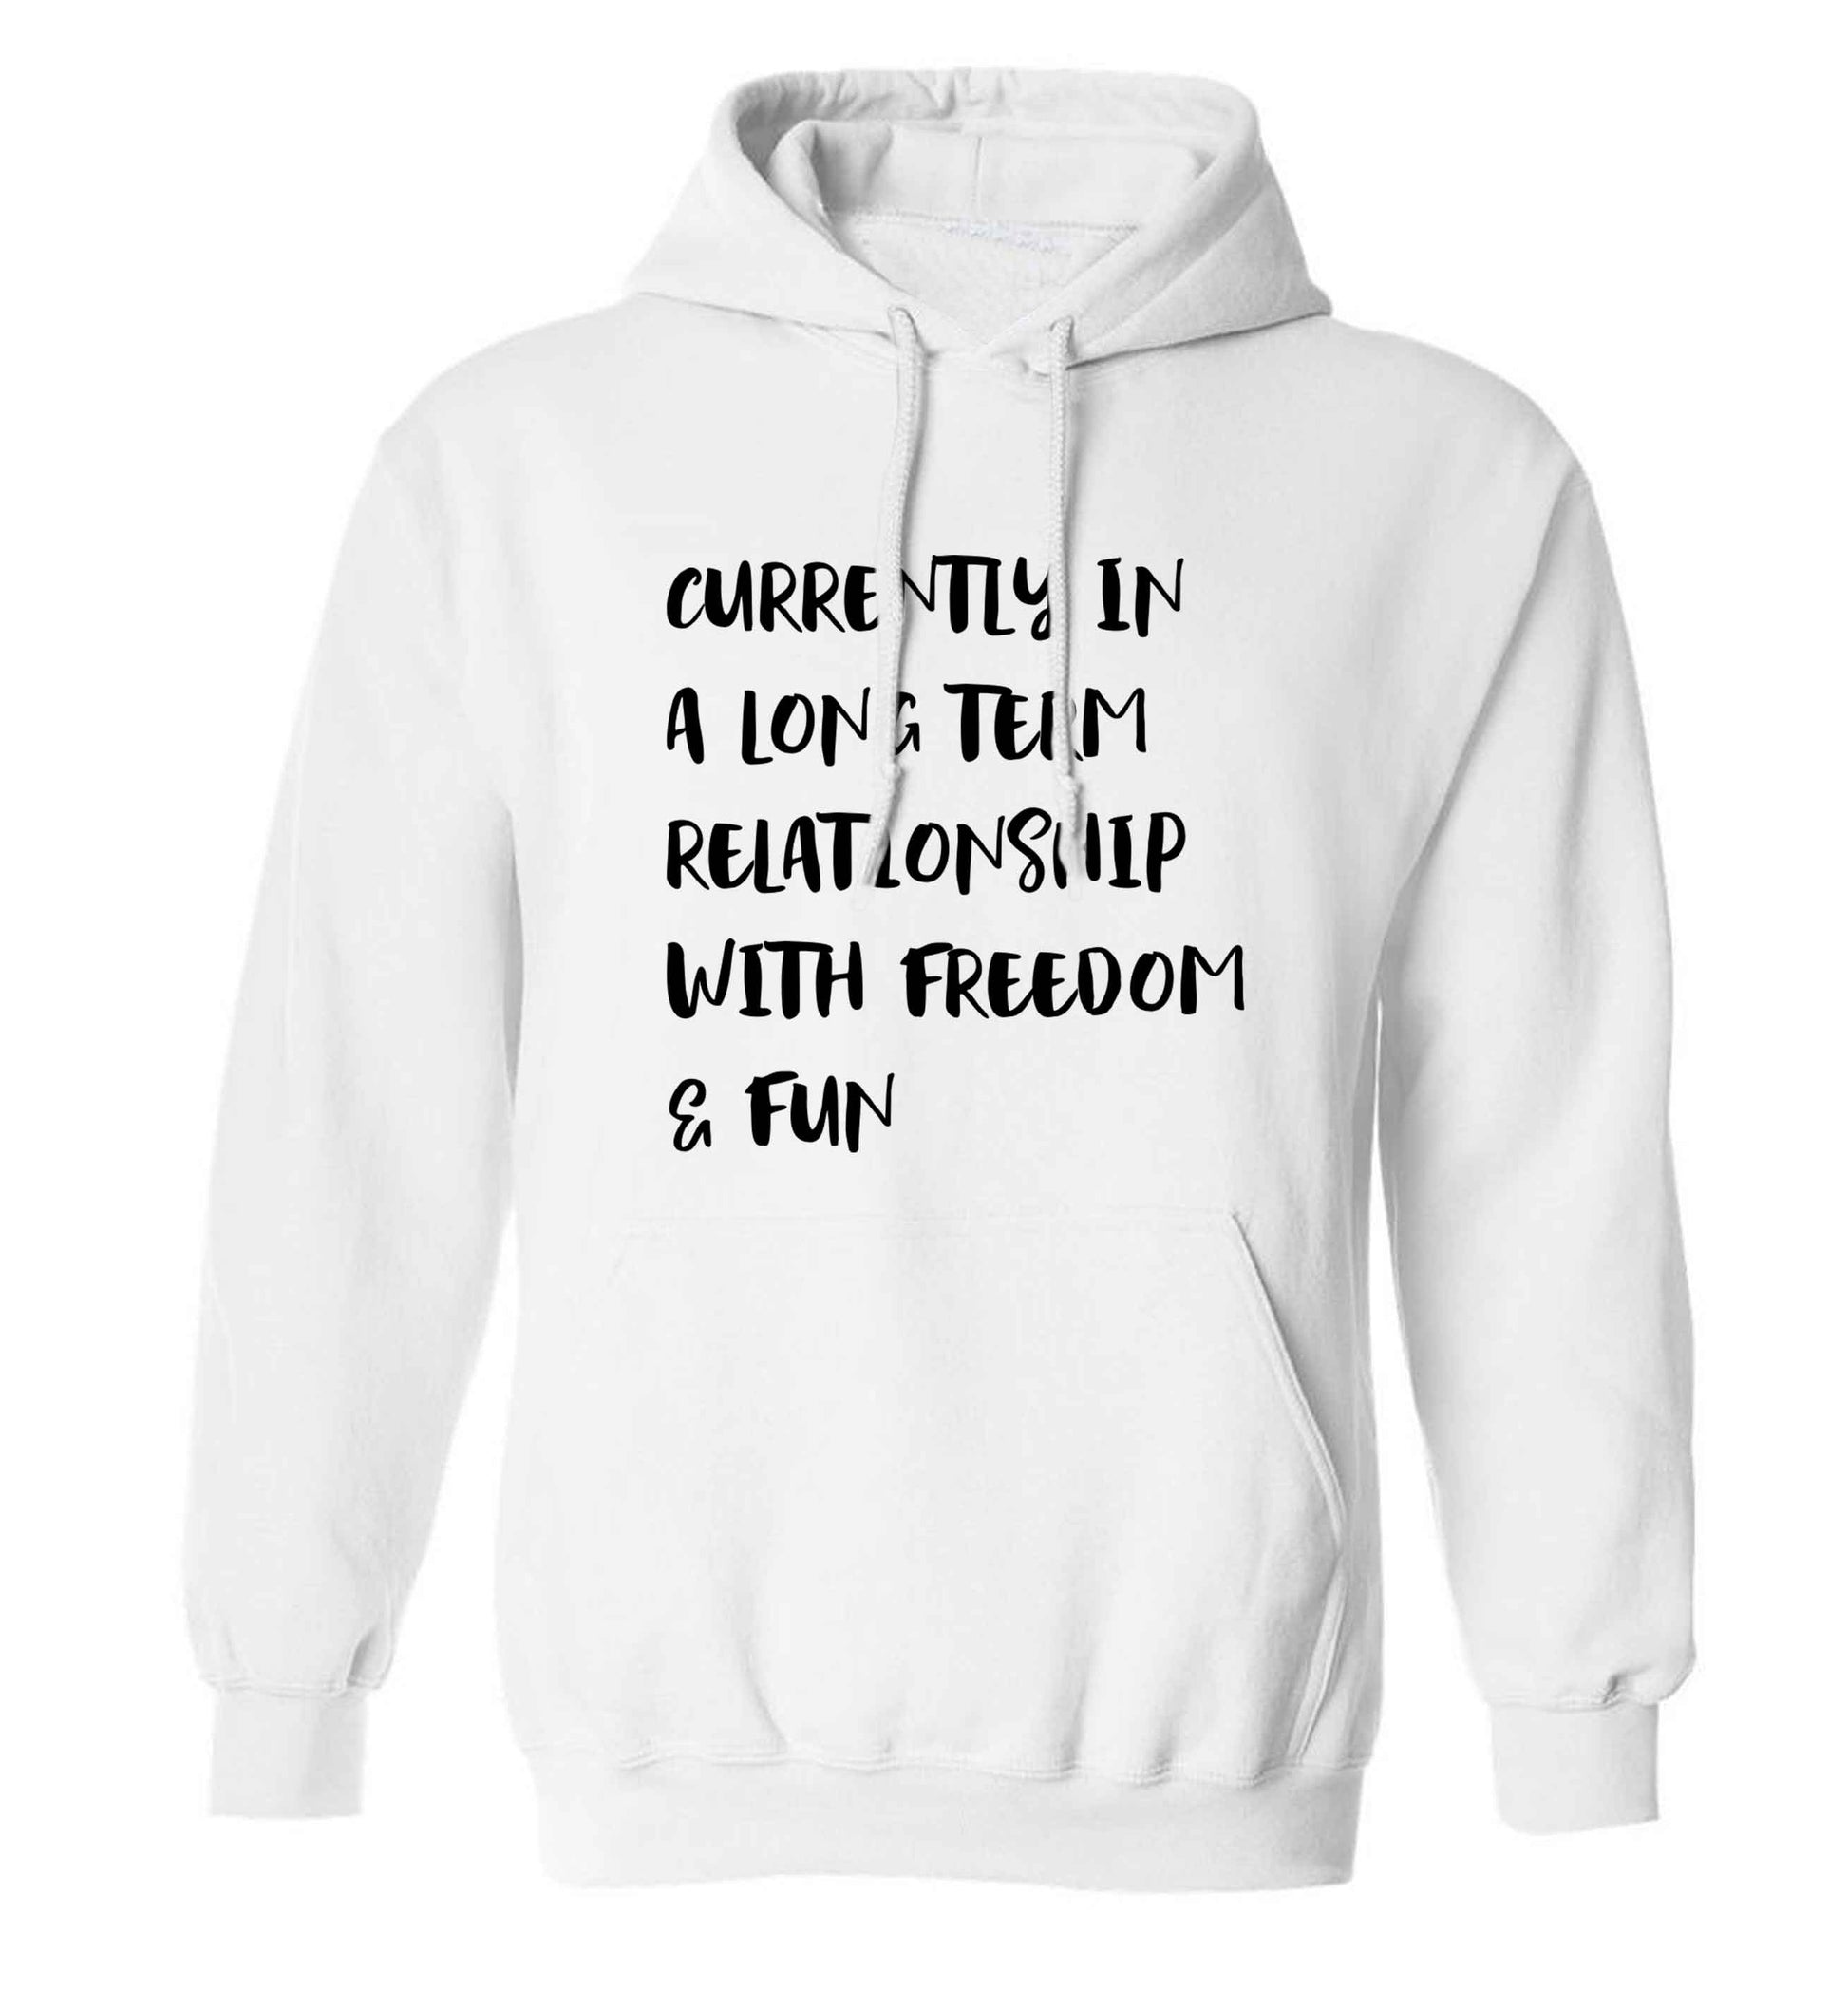 Currently in a long term relationship with freedom and fun adults unisex white hoodie 2XL